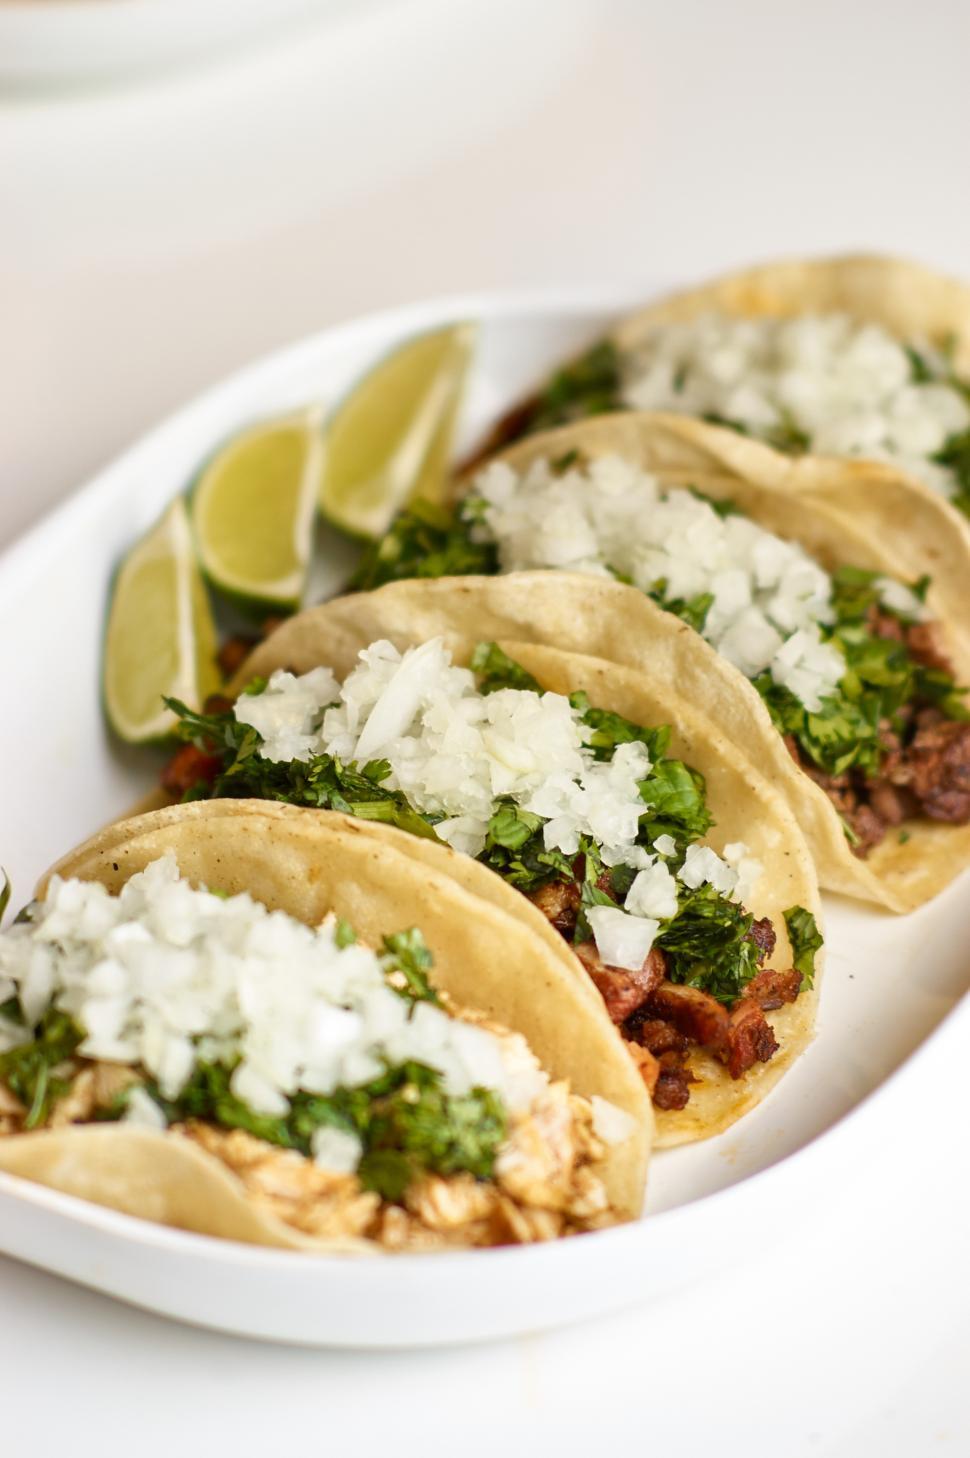 Free Image of A plate of tacos with limes 